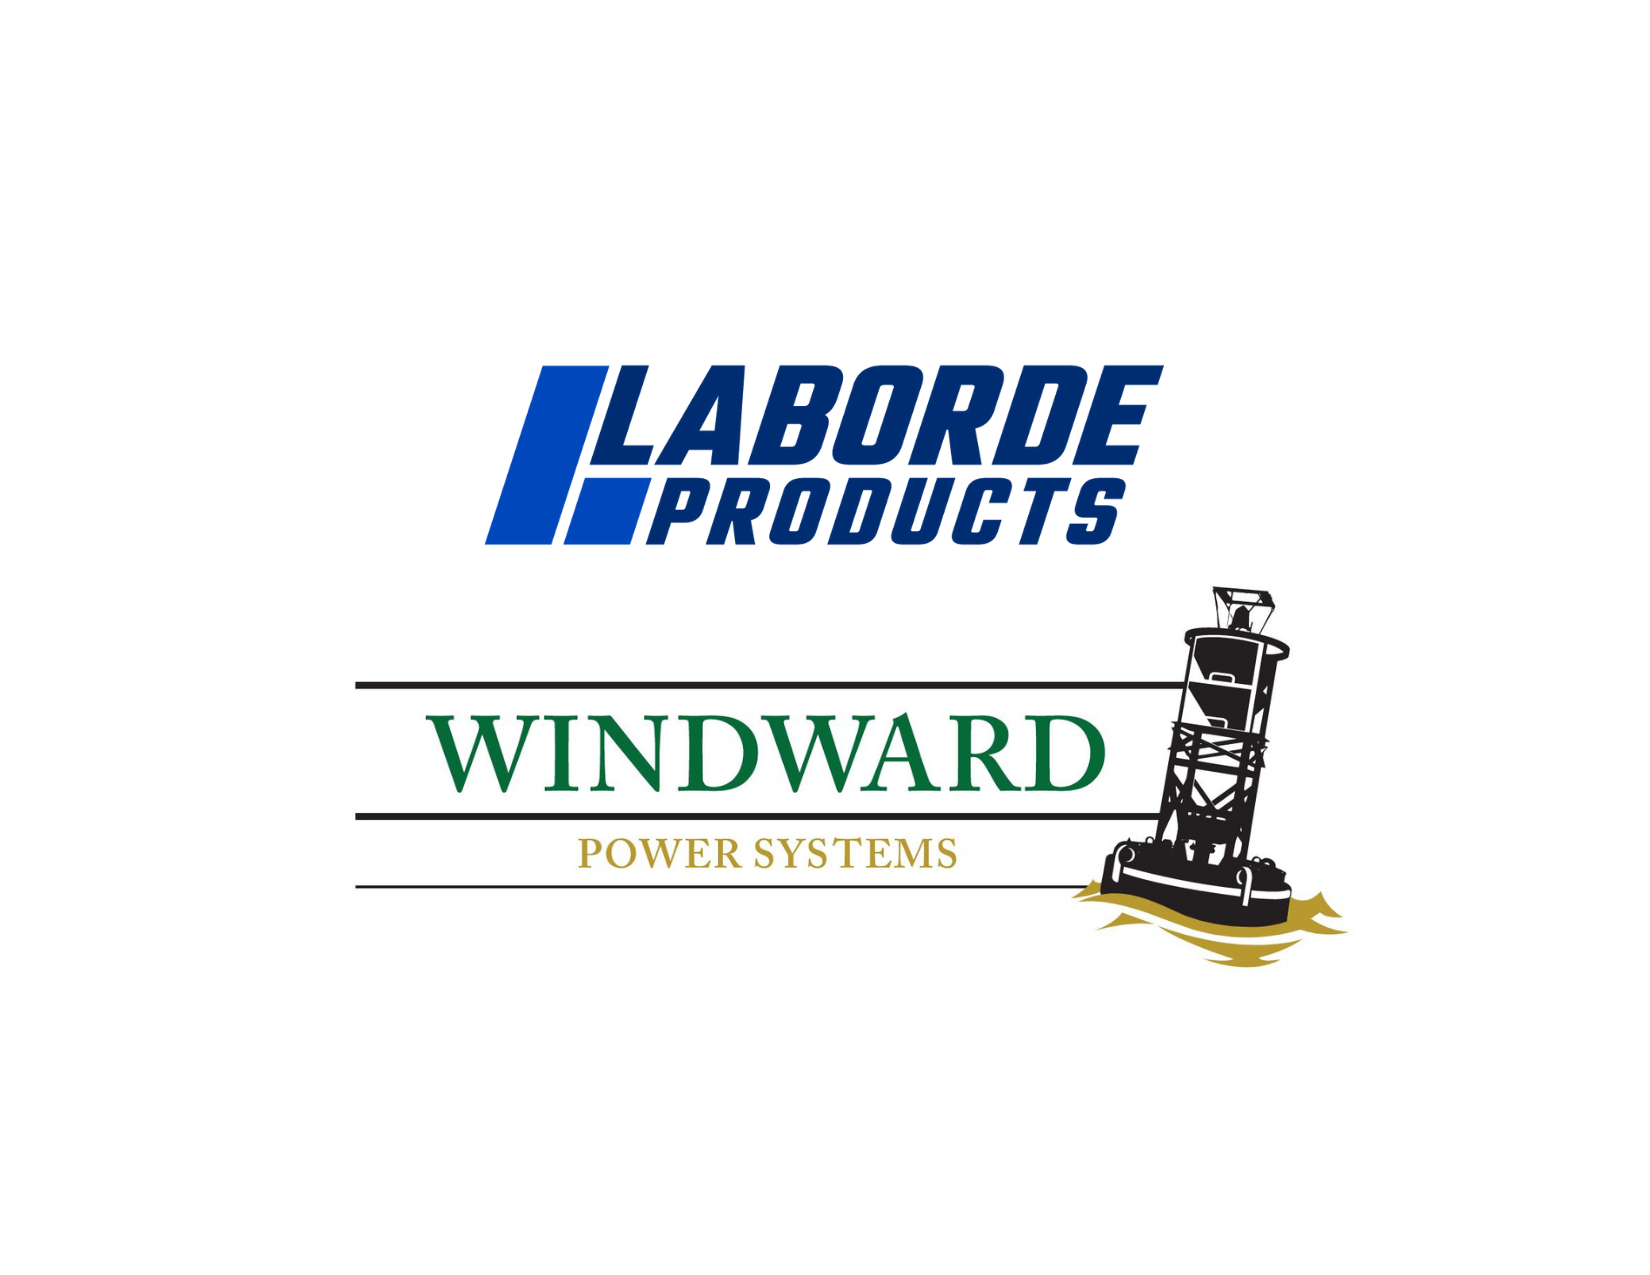 laborde products logo and windward power systems logo